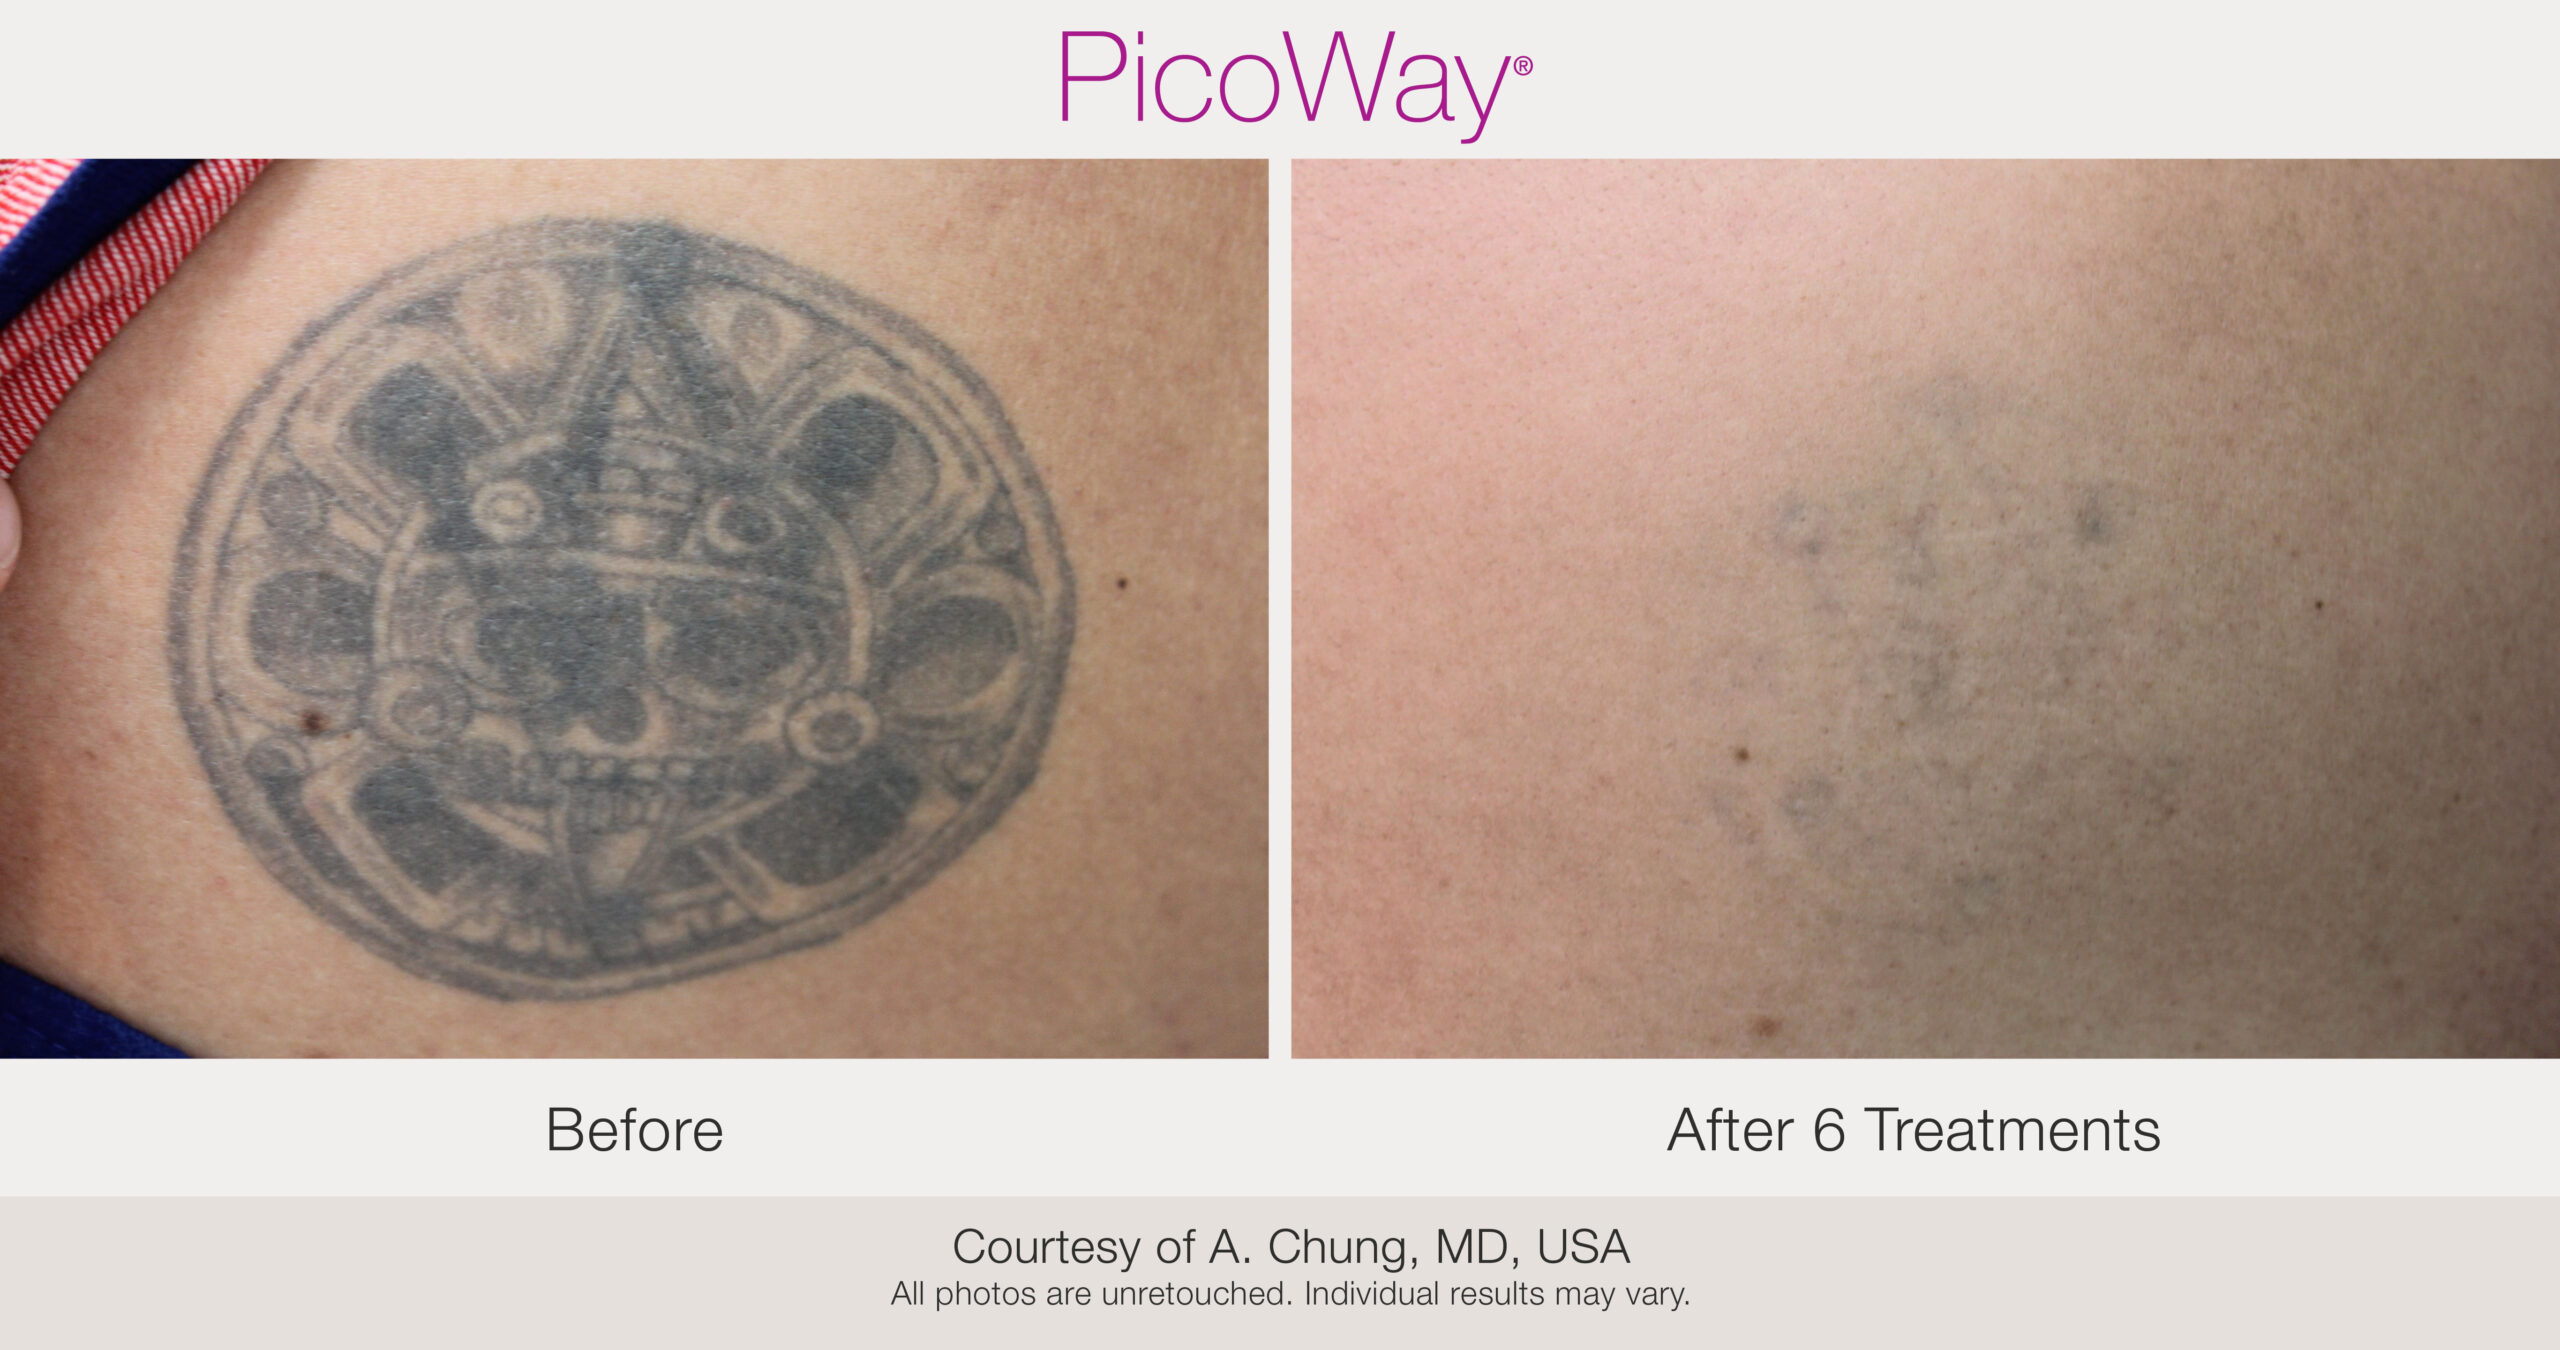 laser tattoo removal before and after photos - picoway - xsculpt Chicago Illinois